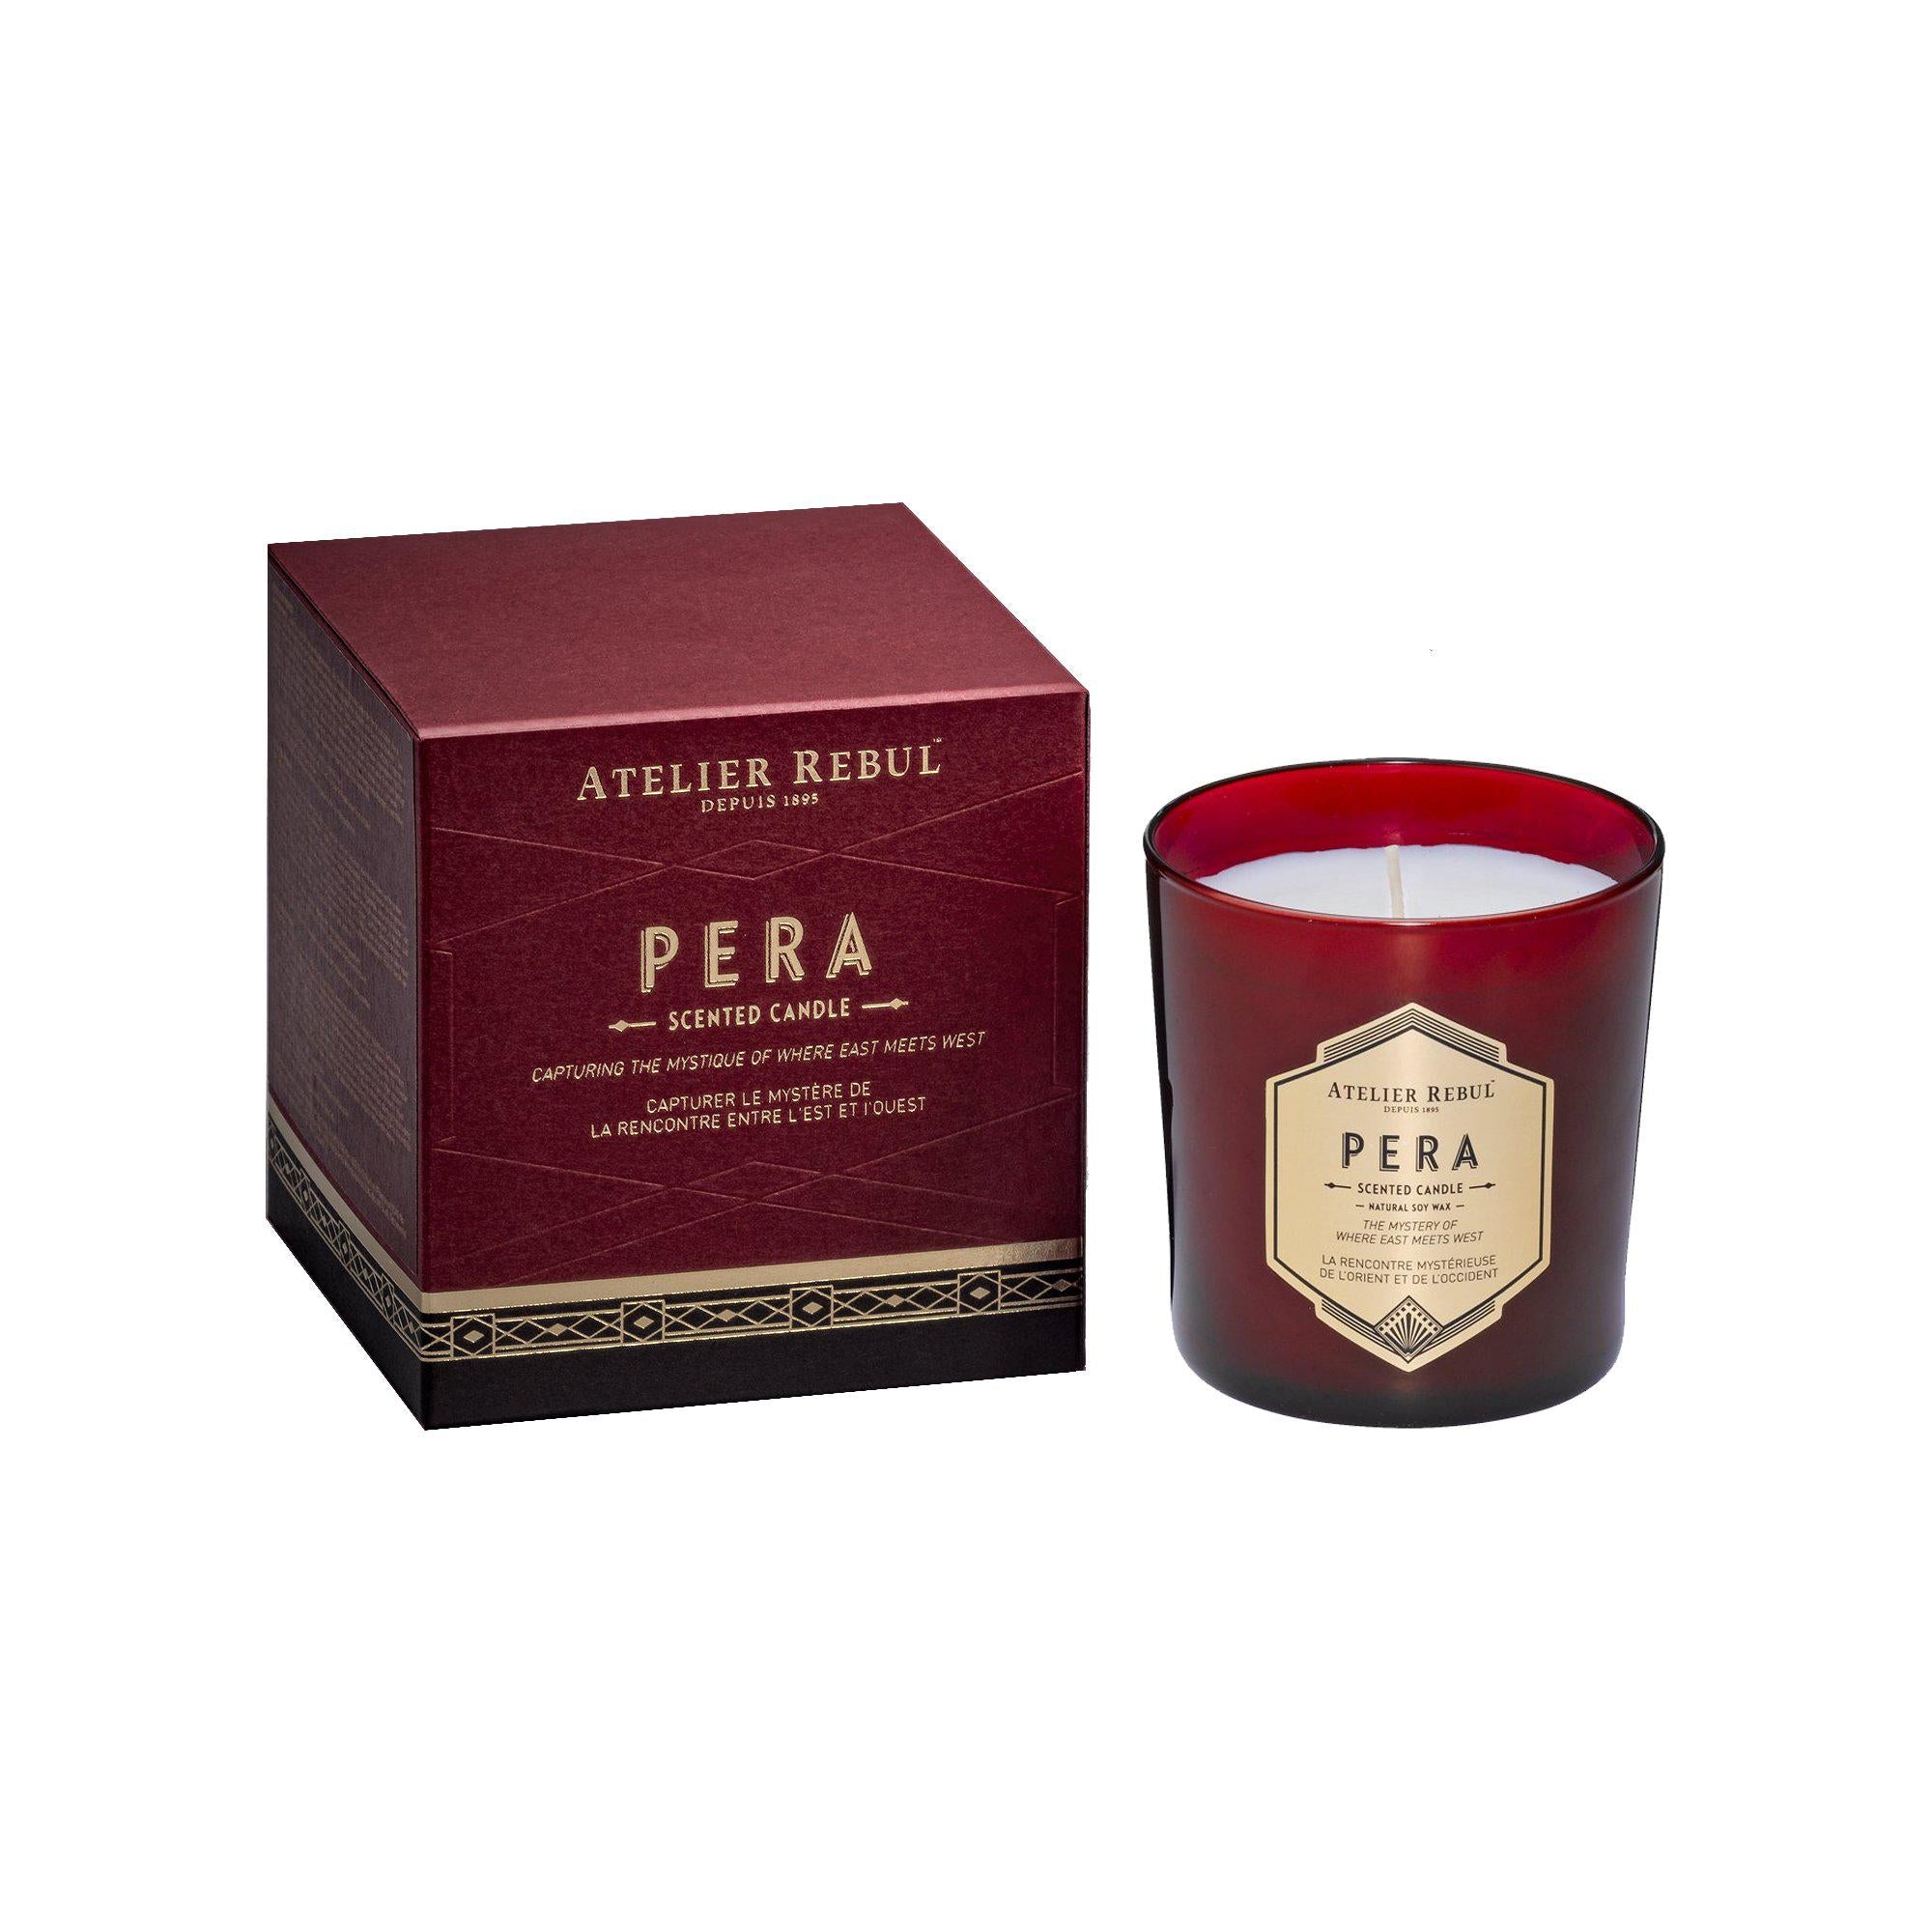 Pera Scented Candle 210g | Atelier Rebul Webshop